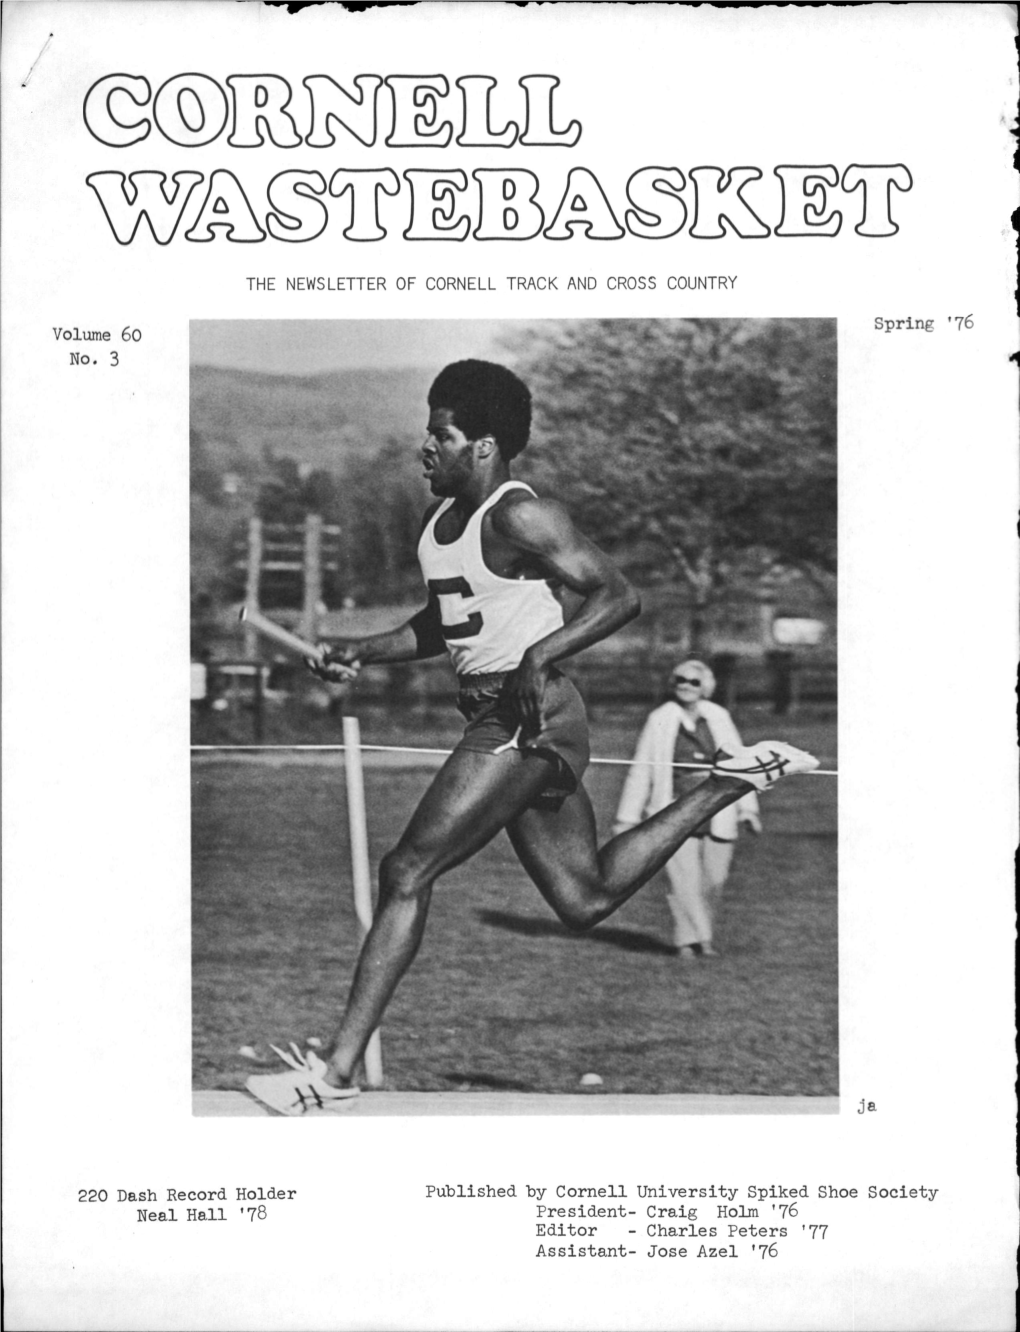 '76 220 Dash Record Holder Published Neal Hall '78 by Cornell University Spiked Shoe Society President